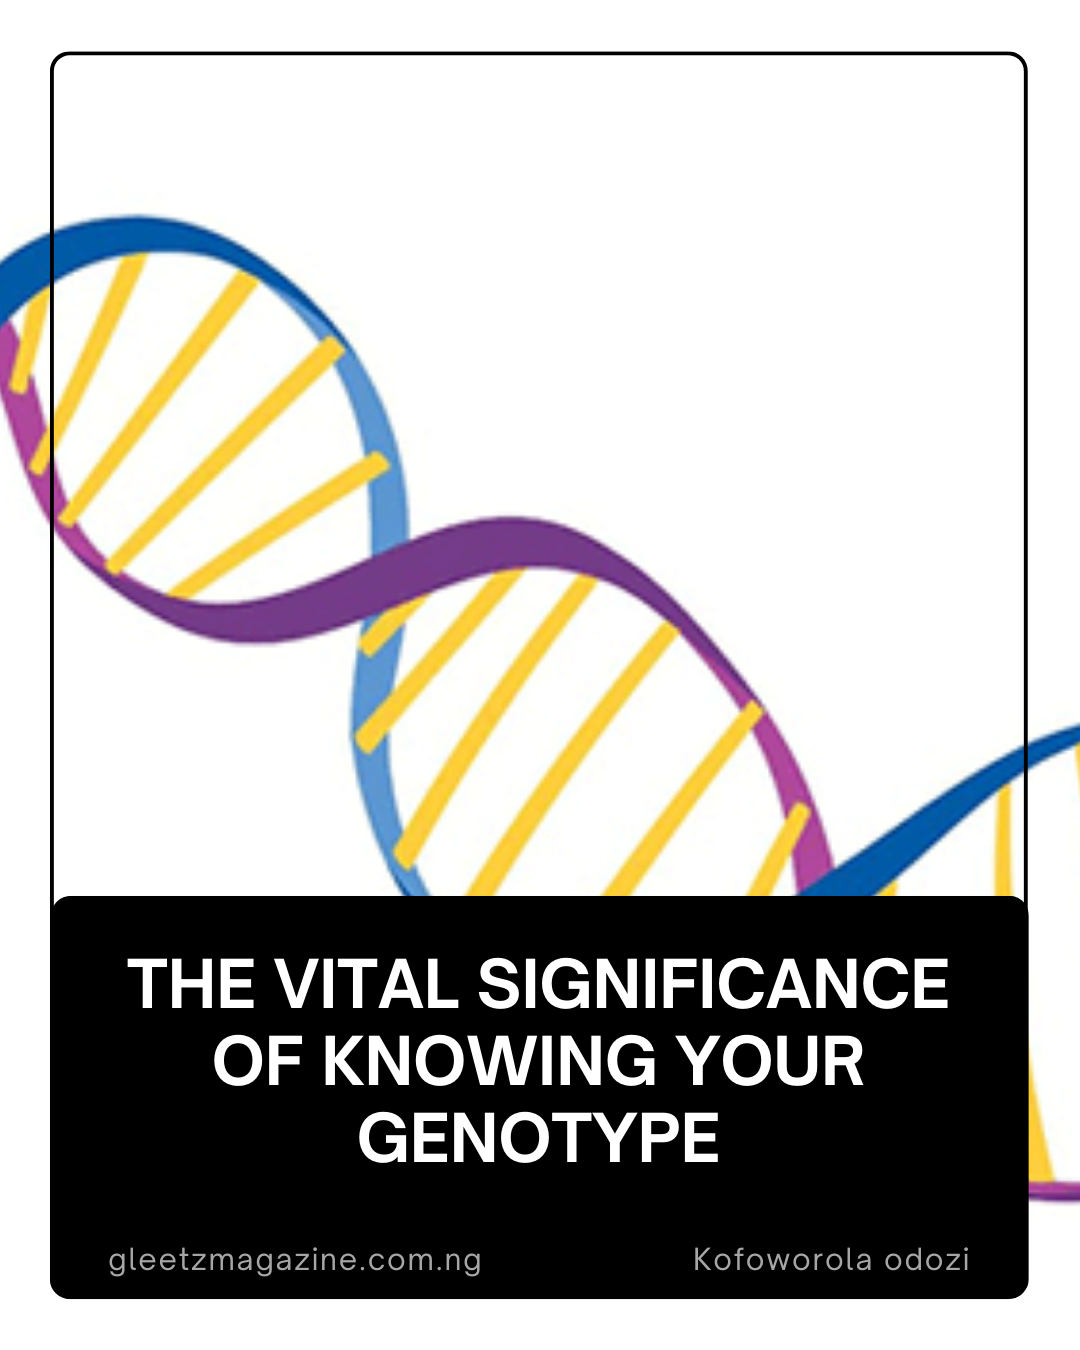 The Vital Significance of Knowing Your Genotype